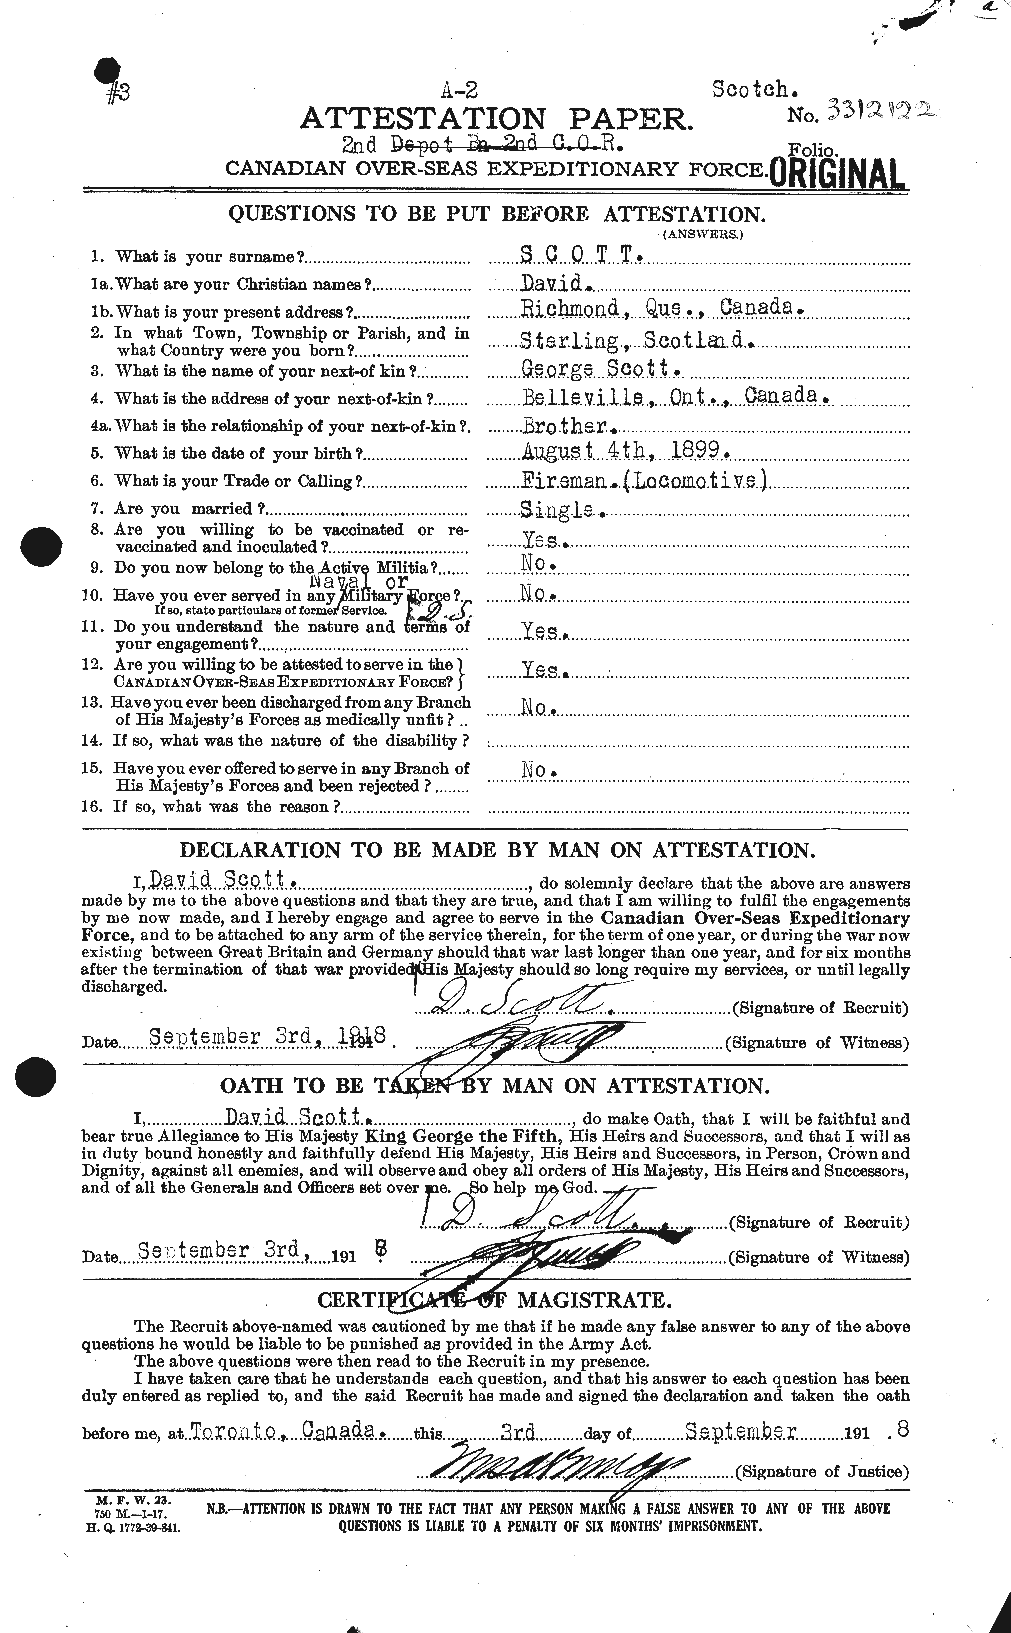 Personnel Records of the First World War - CEF 085607a